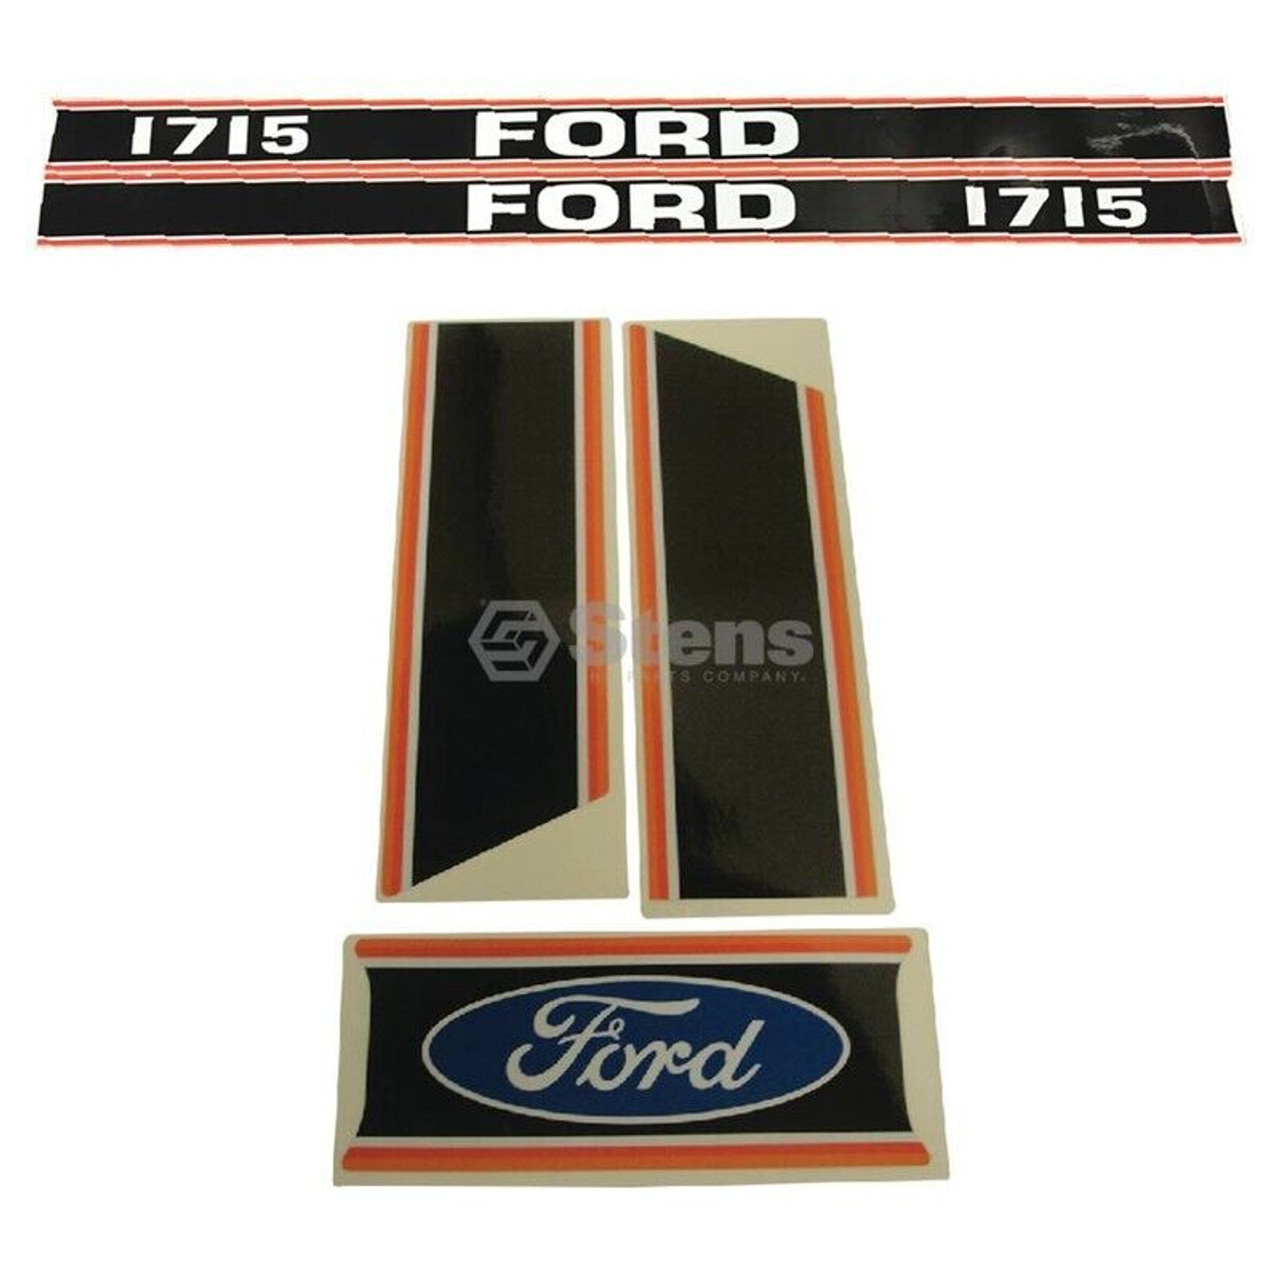 Ford 1715 Decal Set